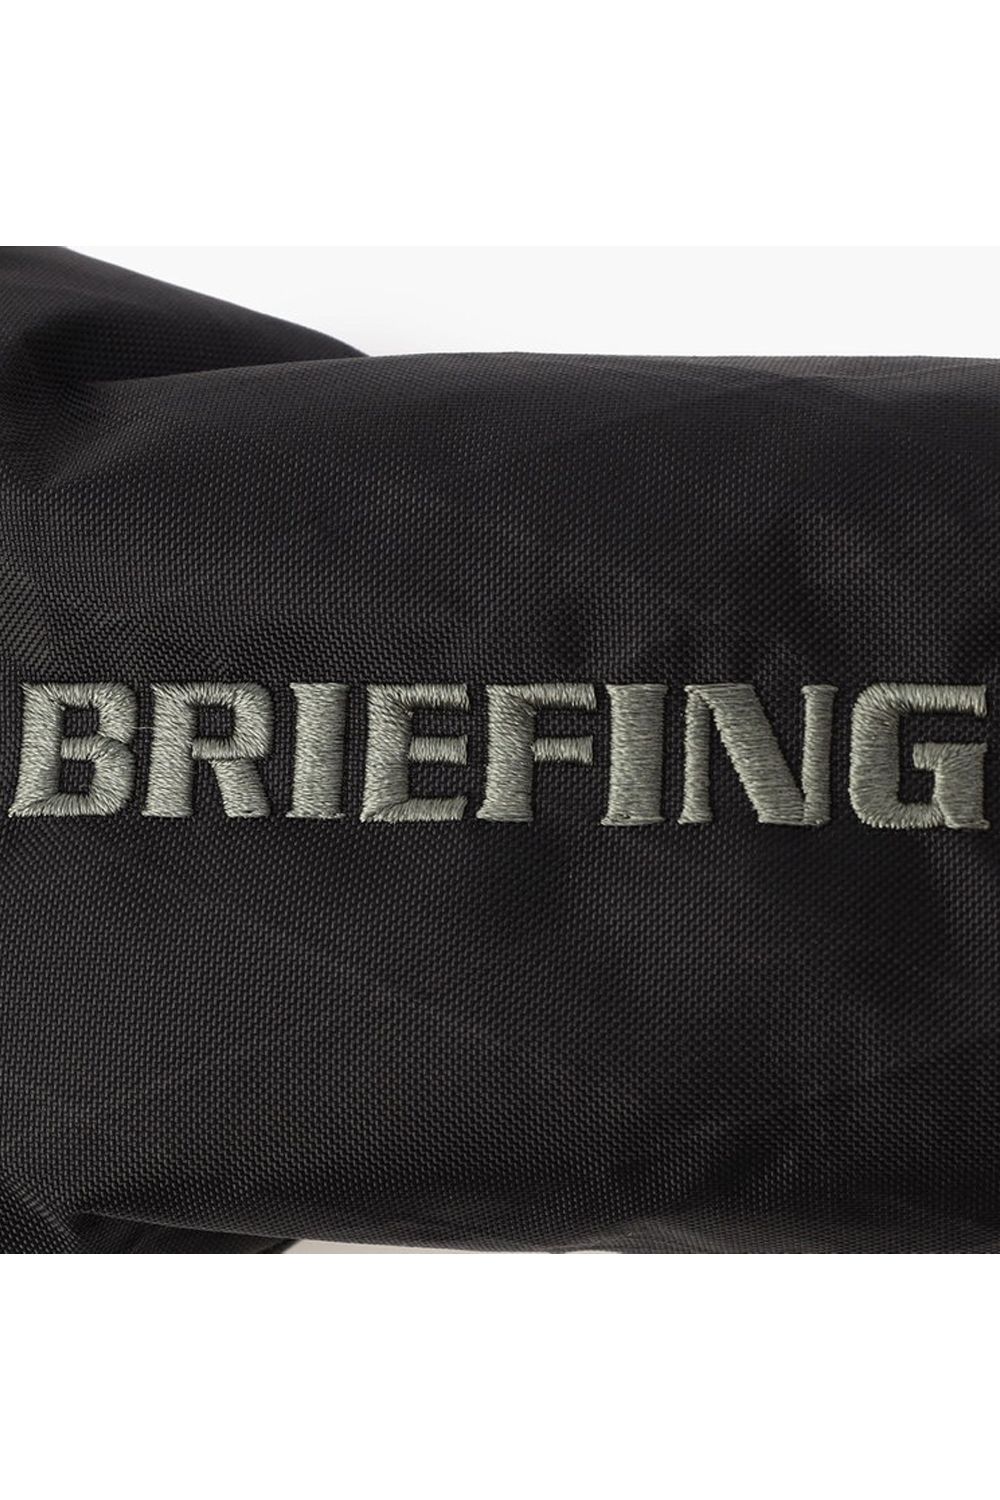 BRIEFING - 【MIL COLLECTION】 FAIRWAY WOOD COVER XP WOLF GRAY / ダイヤチェック